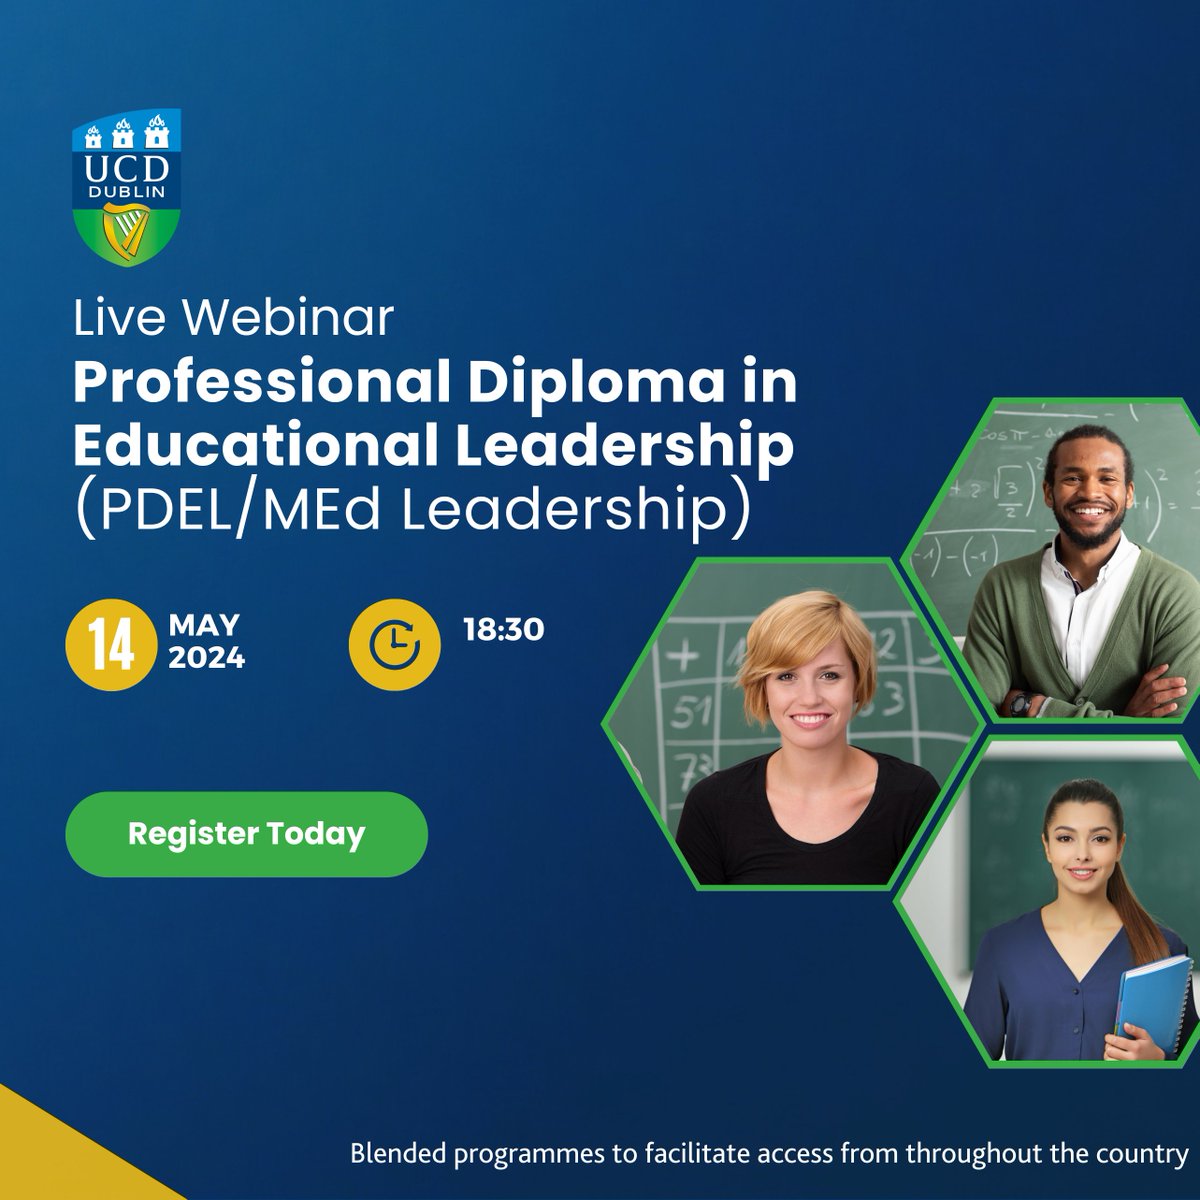 Professional Diploma in Educational Leadership (PDEL)/ MEd Leadership (Blended programmes to facilitate access from throughout the Country) Event: Information Webinar Date/Time: Tuesday 14th May @ 6.30 pm. Register: bit.ly/4b4ZaKT The School of Education @SchoolofEdUCD…